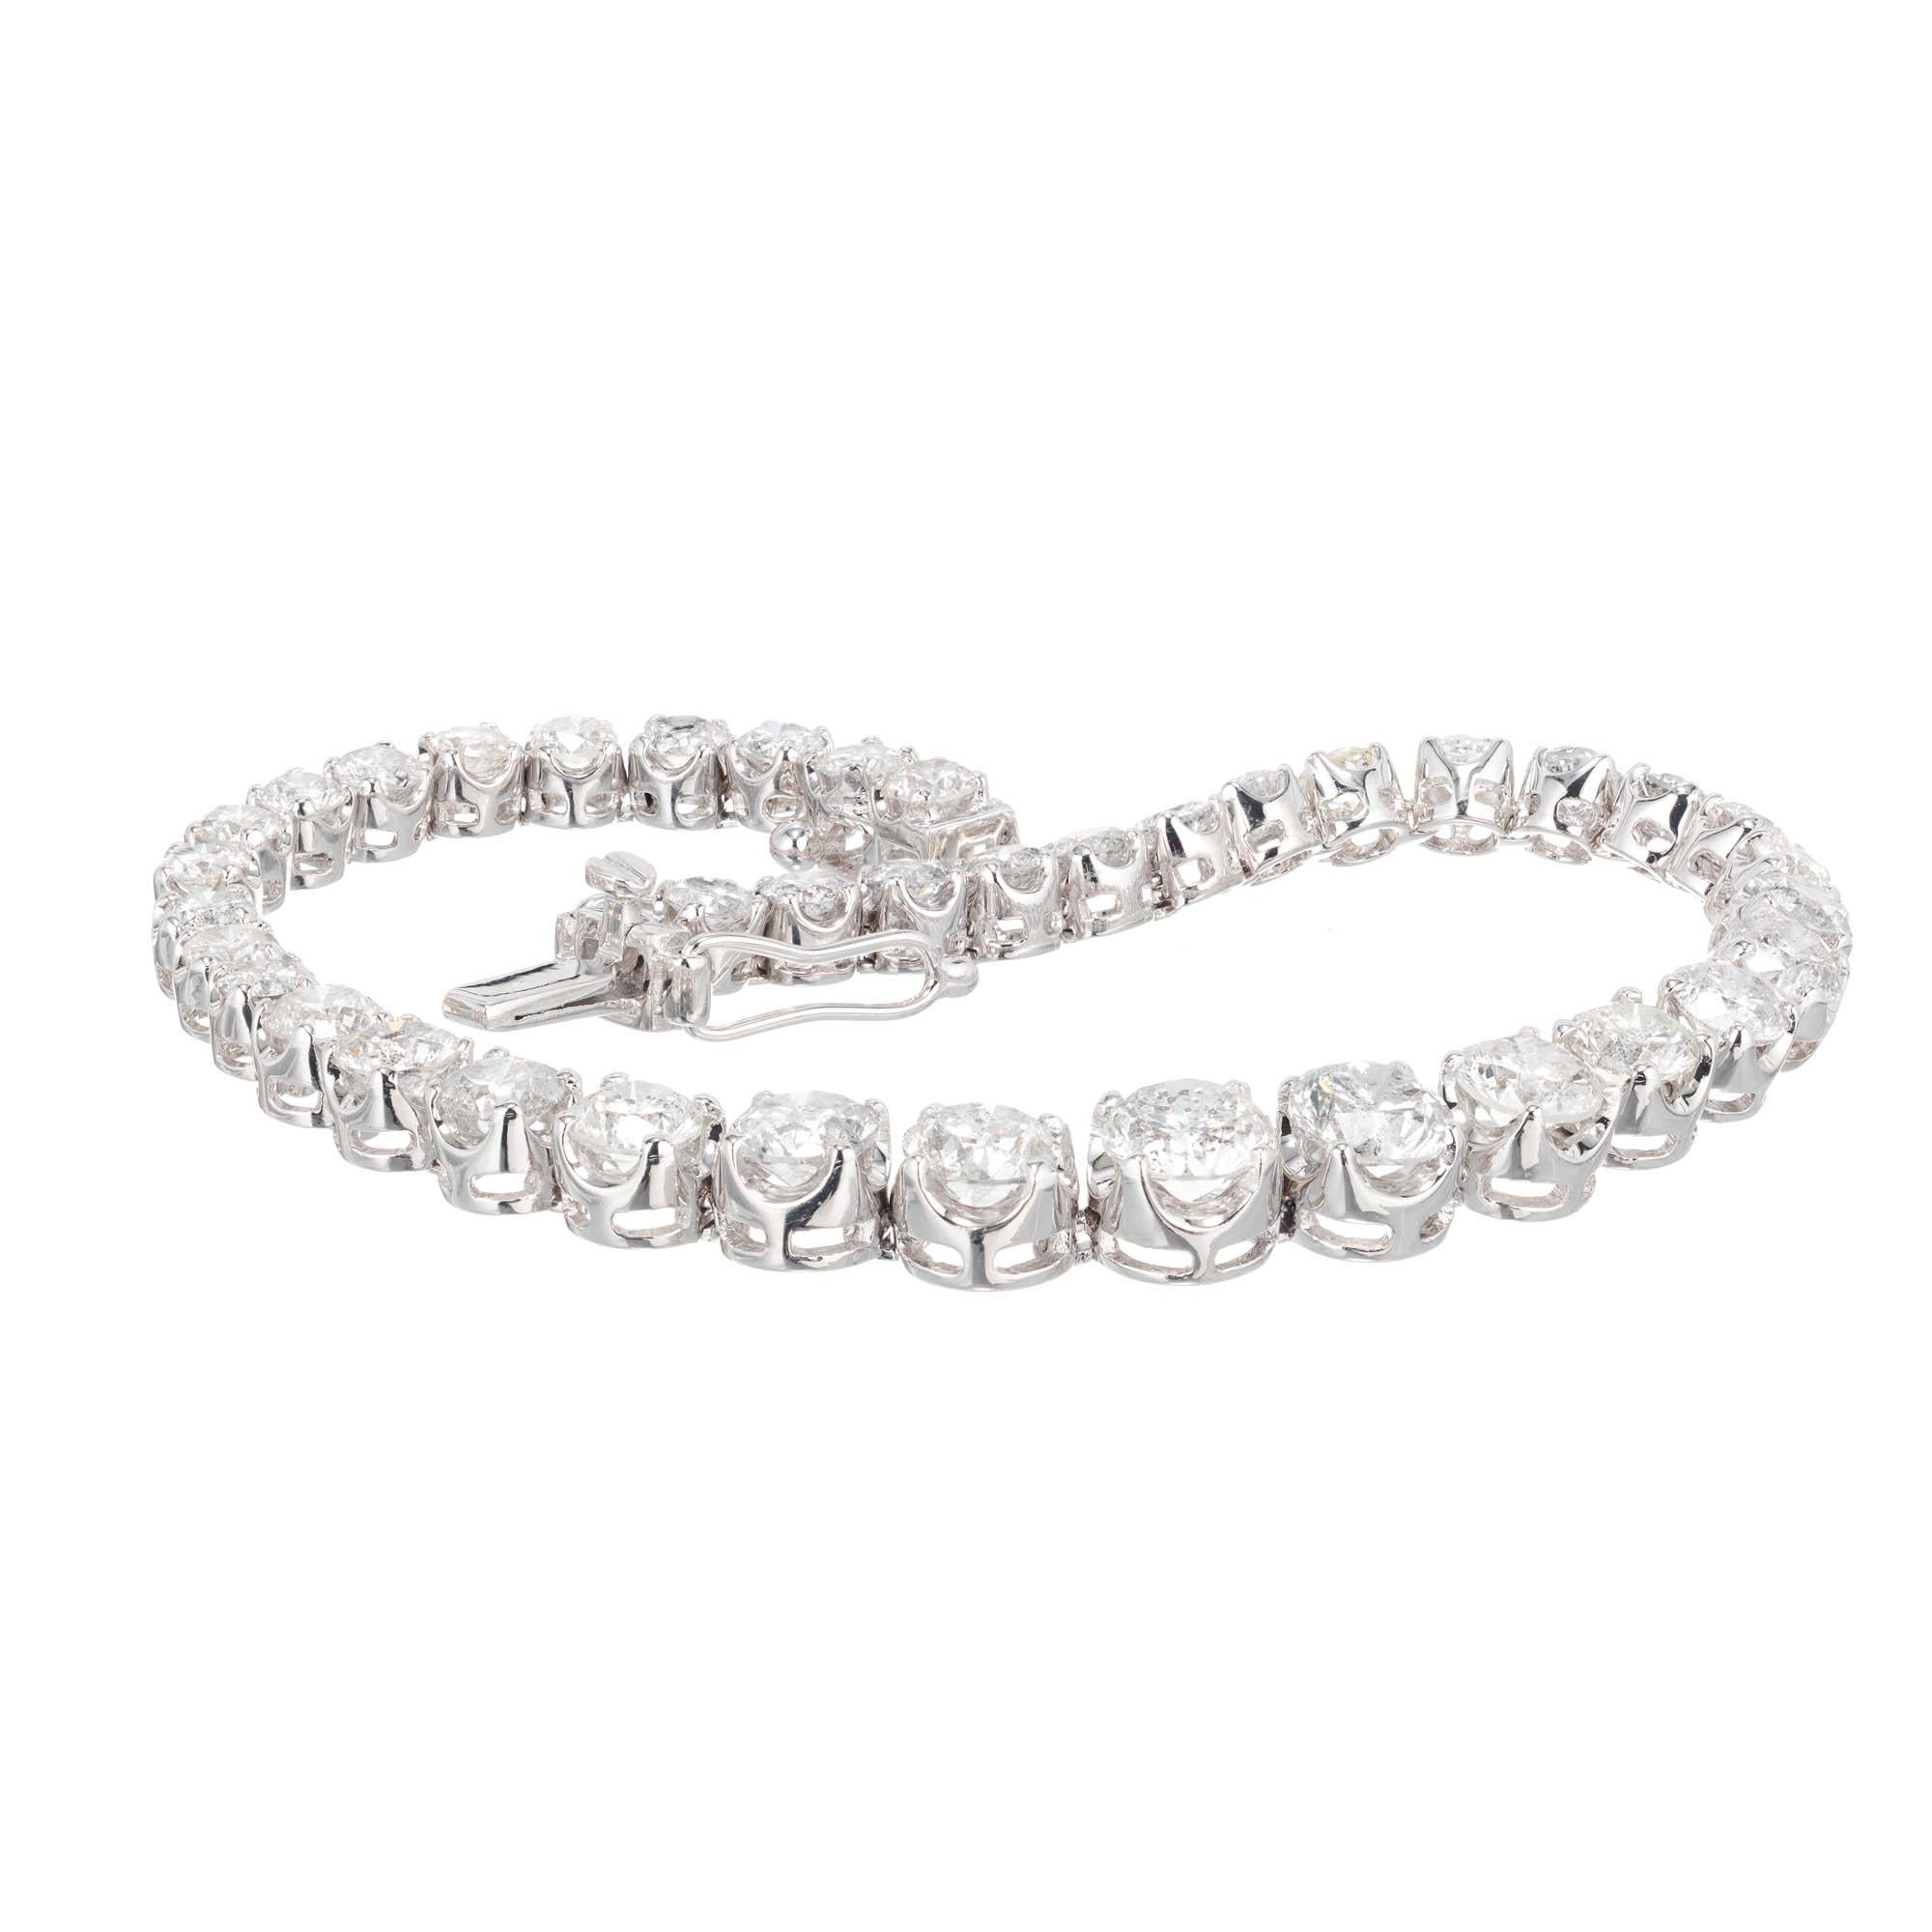 Orianne graduated hinged link Diamond bracelet 8.00ct total, F color, SI2 – I1 clarity bright white and sparkly. Built in catch.

39 round brilliant full cut Diamonds, approx. total weight 8.00cts, F, SI2 – I1 
Length: 7 inches – Width: 6.38mm –